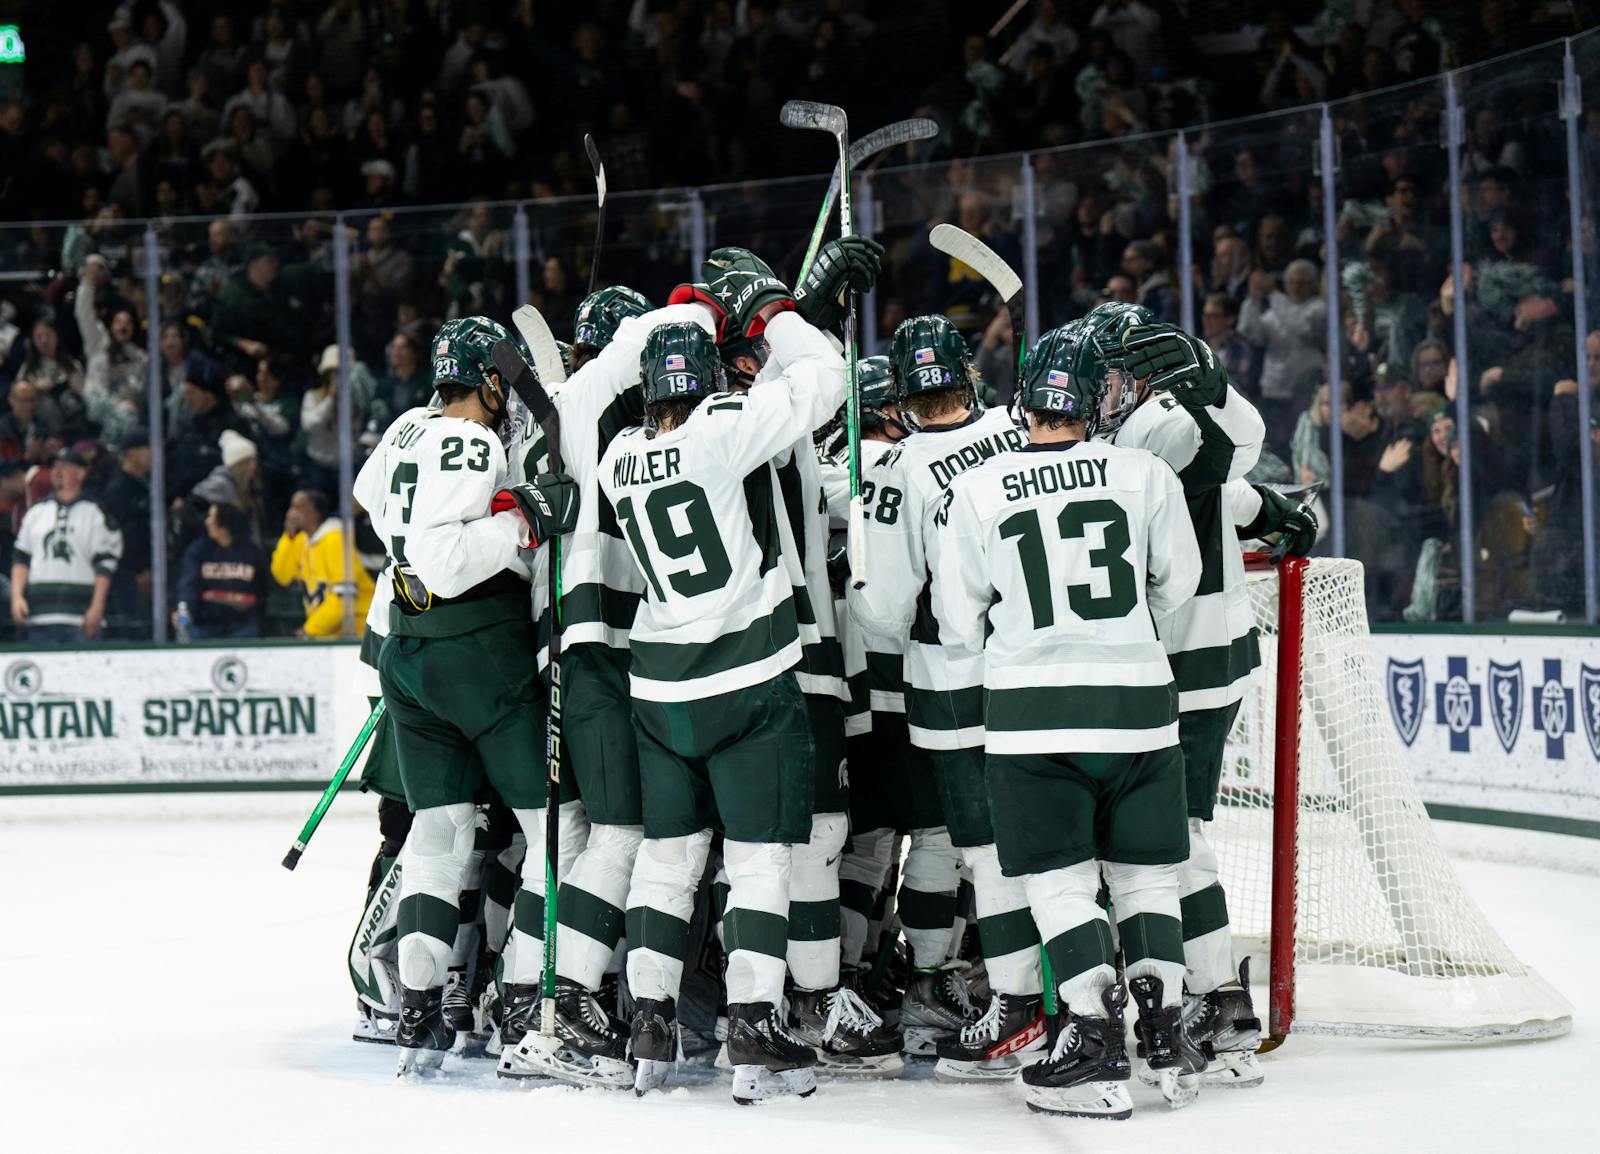 FINAL MSU hockey grinds for exhilarating 21 win over No. 6 Michigan